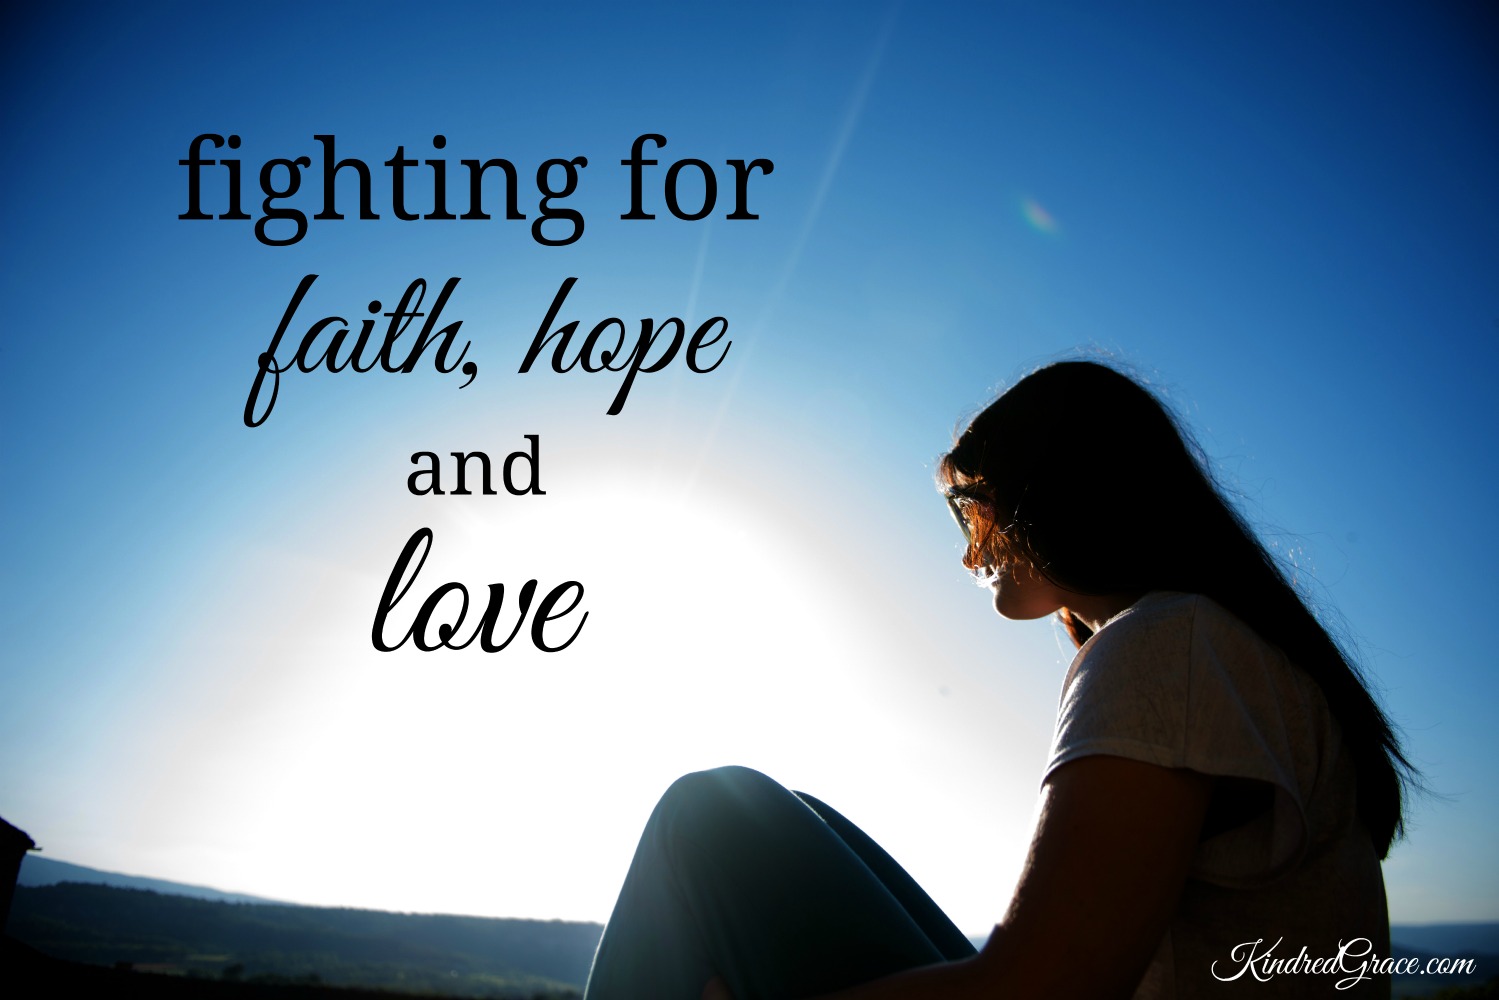 fighting for faith, hope and love